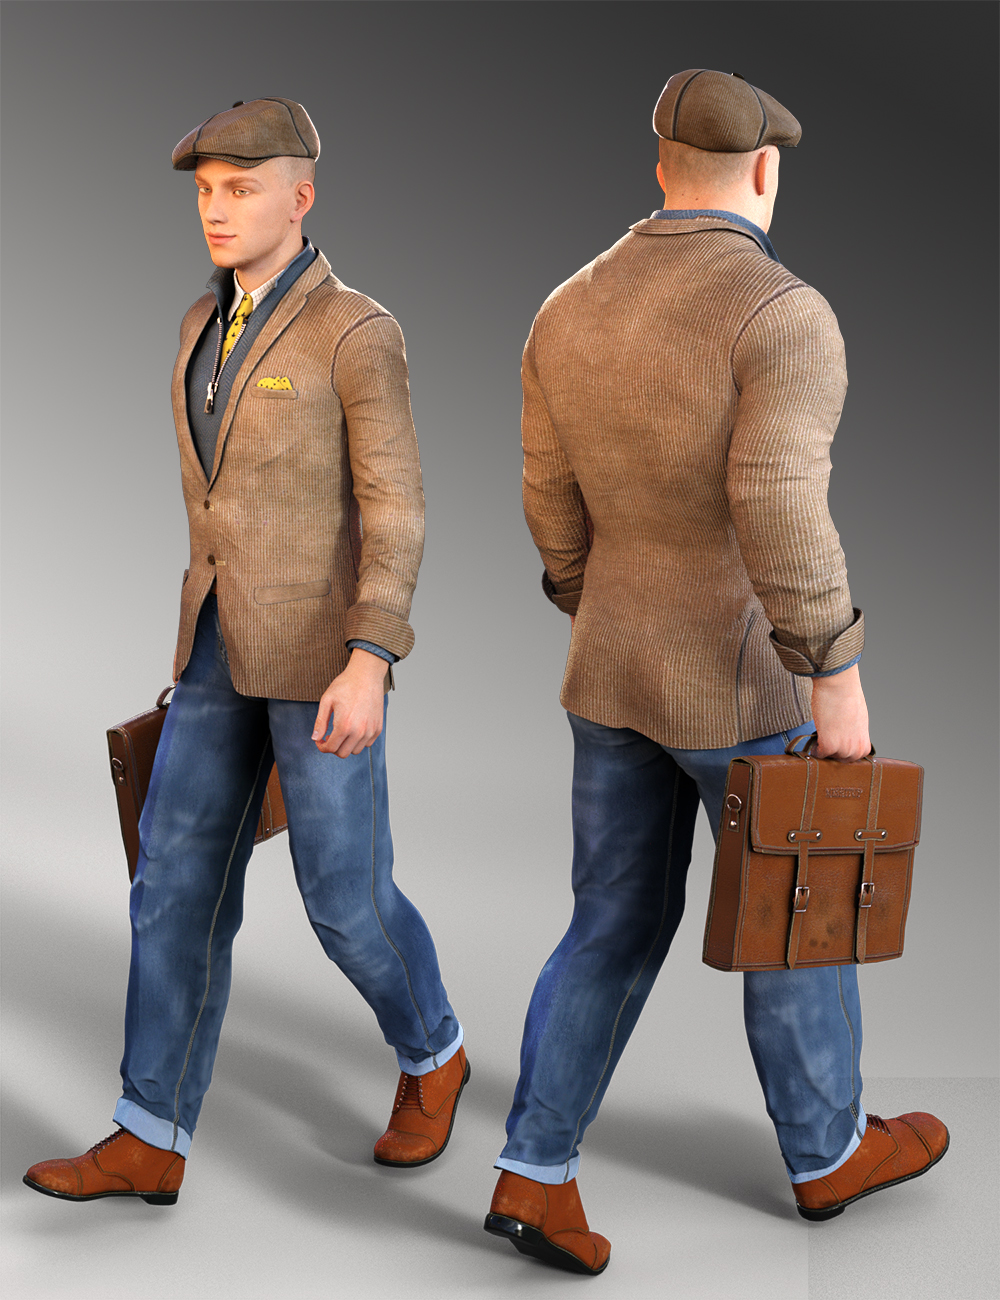 Man About Town for Genesis 3 Male(s) by: Meshitup, 3D Models by Daz 3D